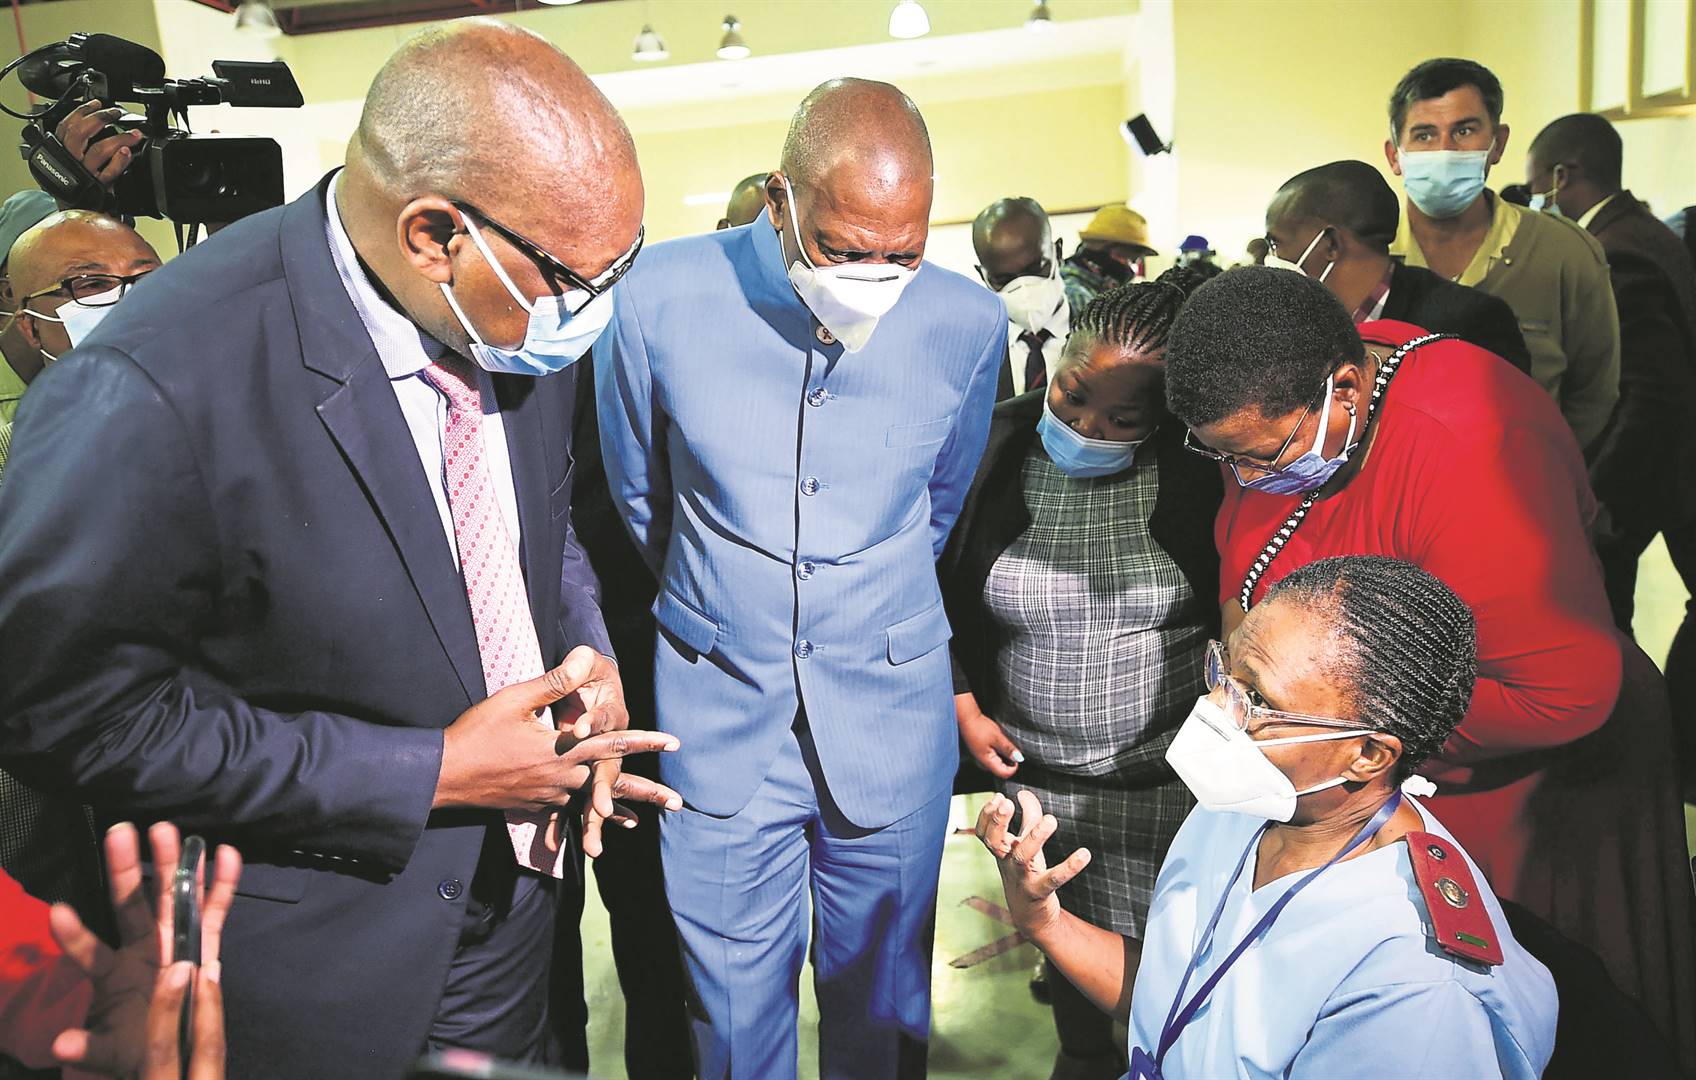 From left: Gauteng Premier David Makhura, Minister of Health Dr Zweli Mkhize and Health MEC Dr Nomathemba Mokgethi visited and inspected various vaccination sites to check their readiness on Thursday.Photo by Trevor Kunene